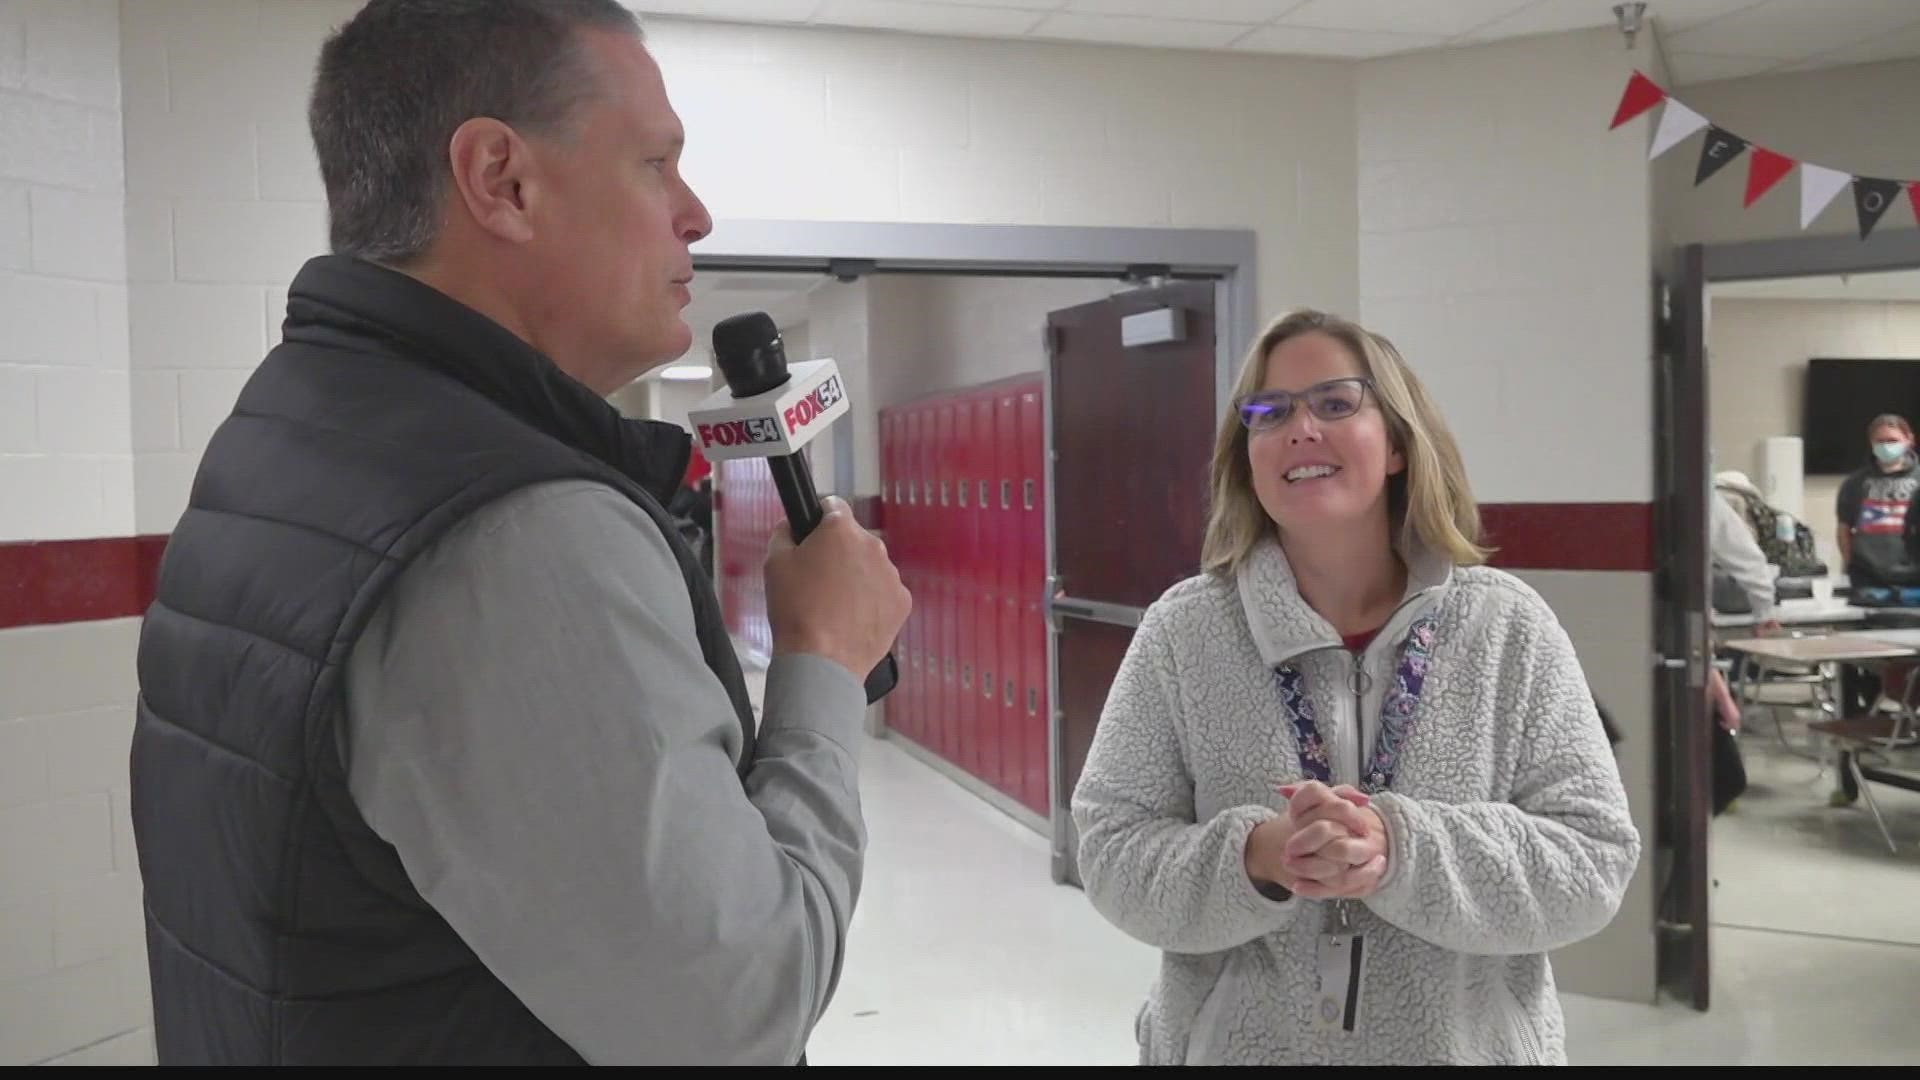 Ms. Emily Pate's hard work has caught the eye of Principal Chris Shaw, which is why she's this week's Valley's Top Teacher.